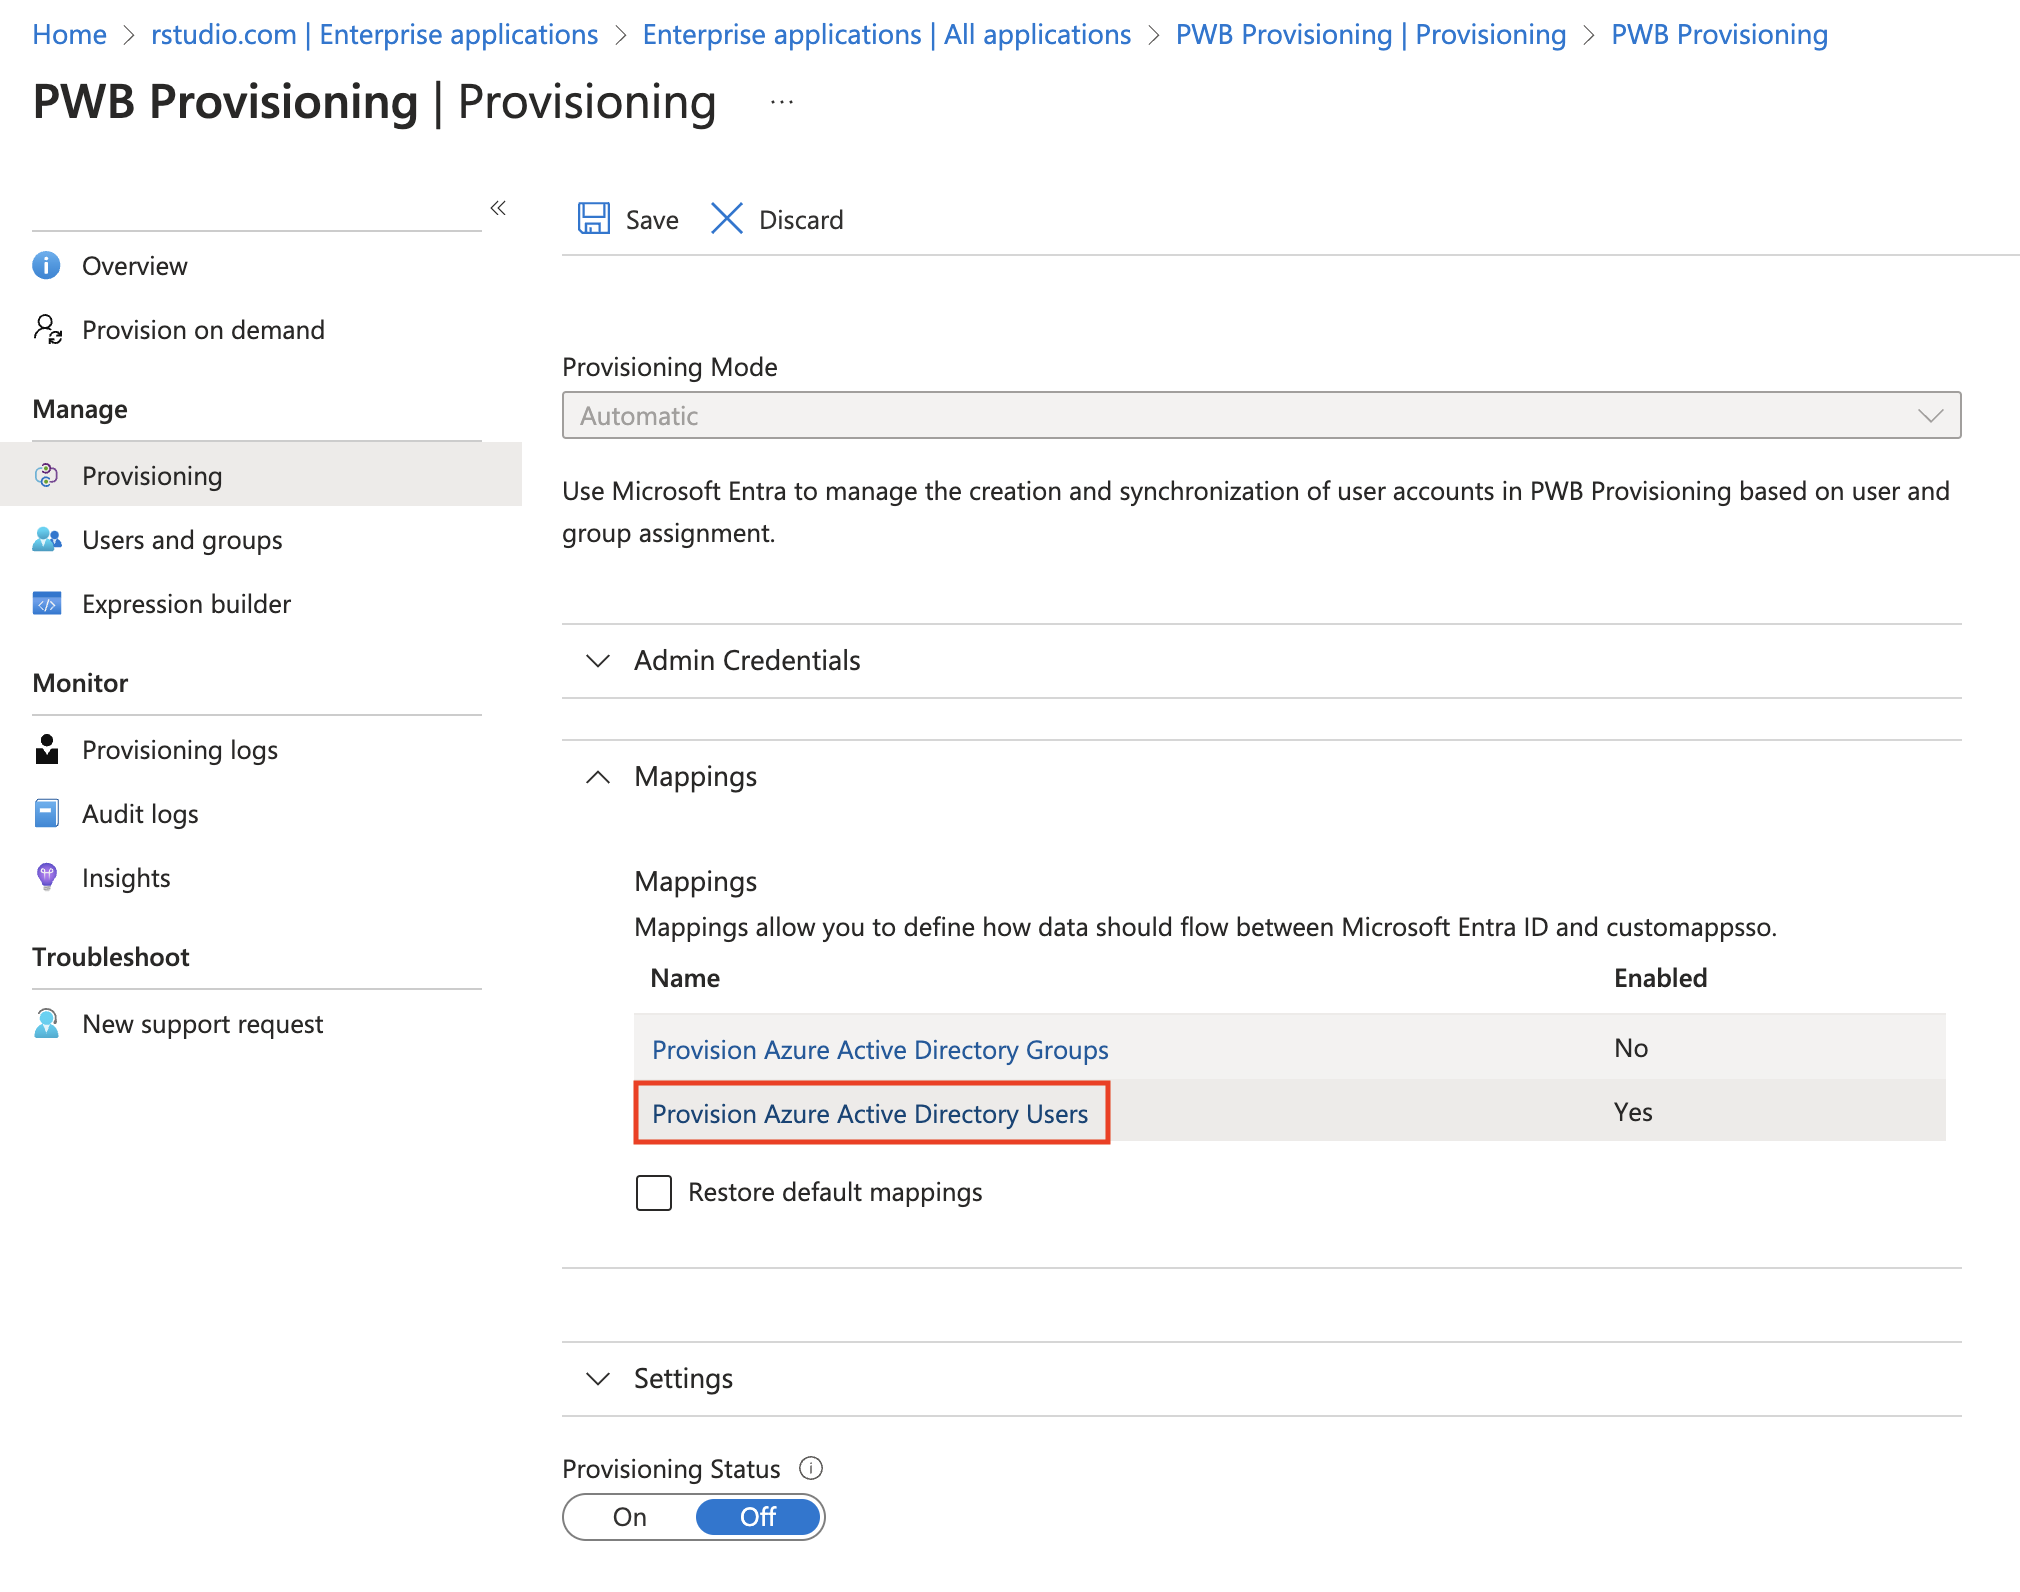 Screenshot of the Provisioning blade with the Mappings section expanded and the Provision Azure Active Directory Users option highlighted.